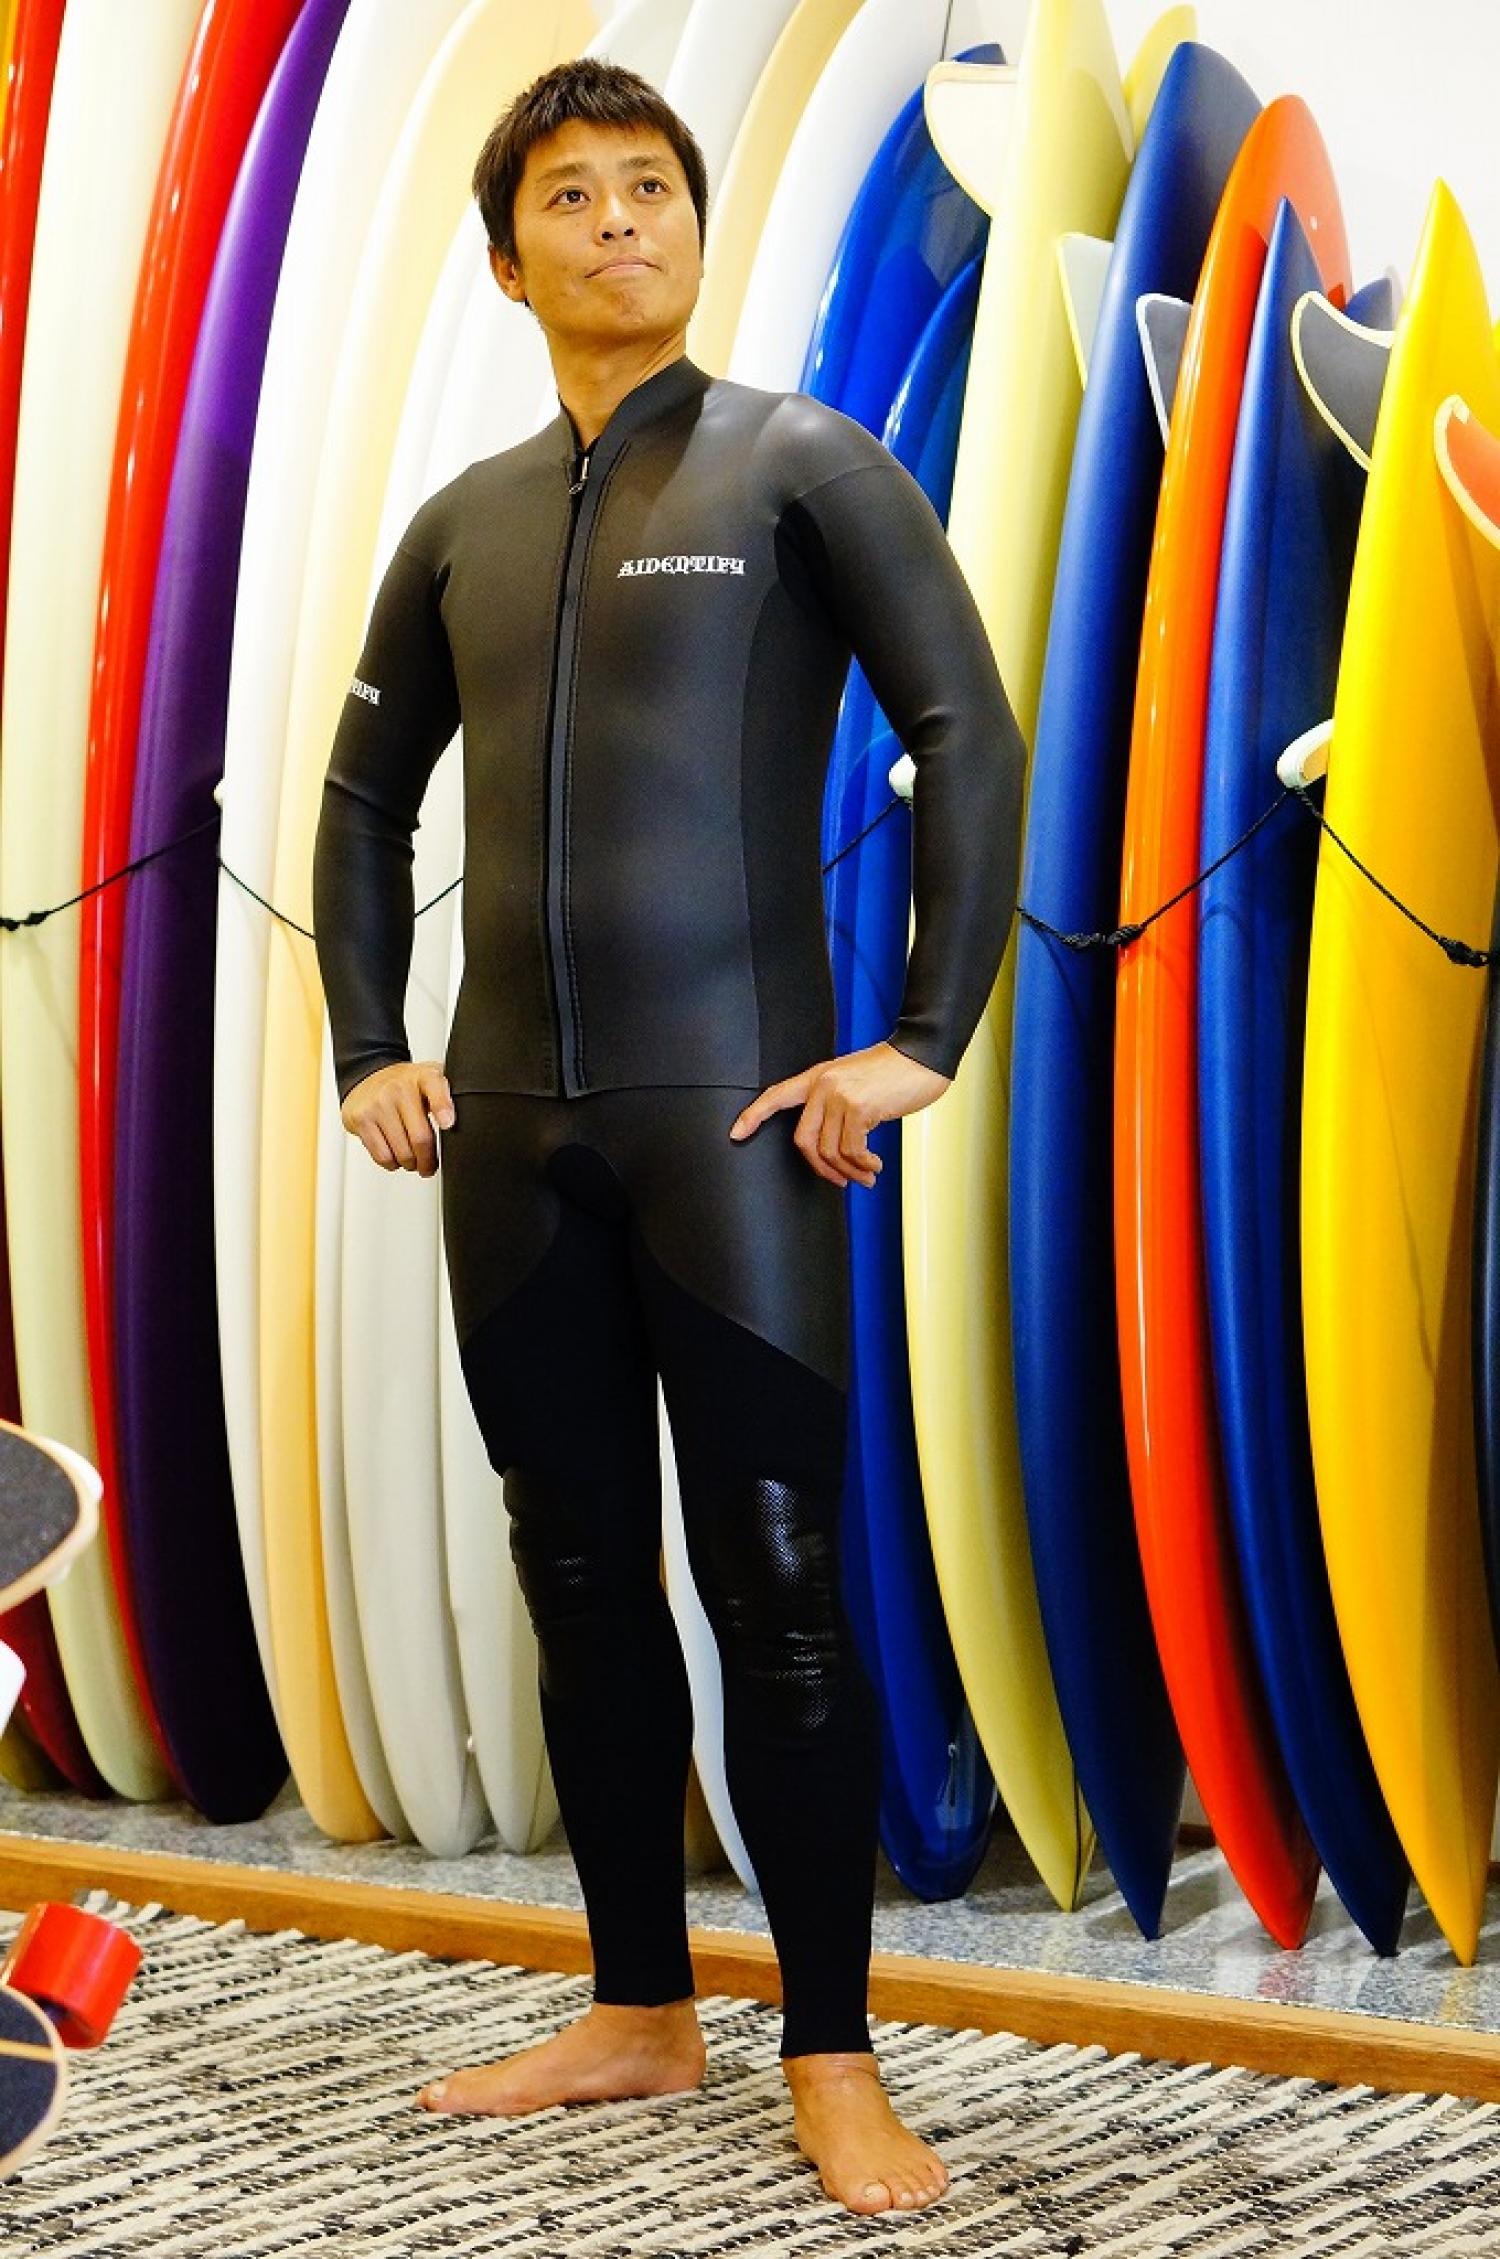 AIDENTIFY WETSUITS